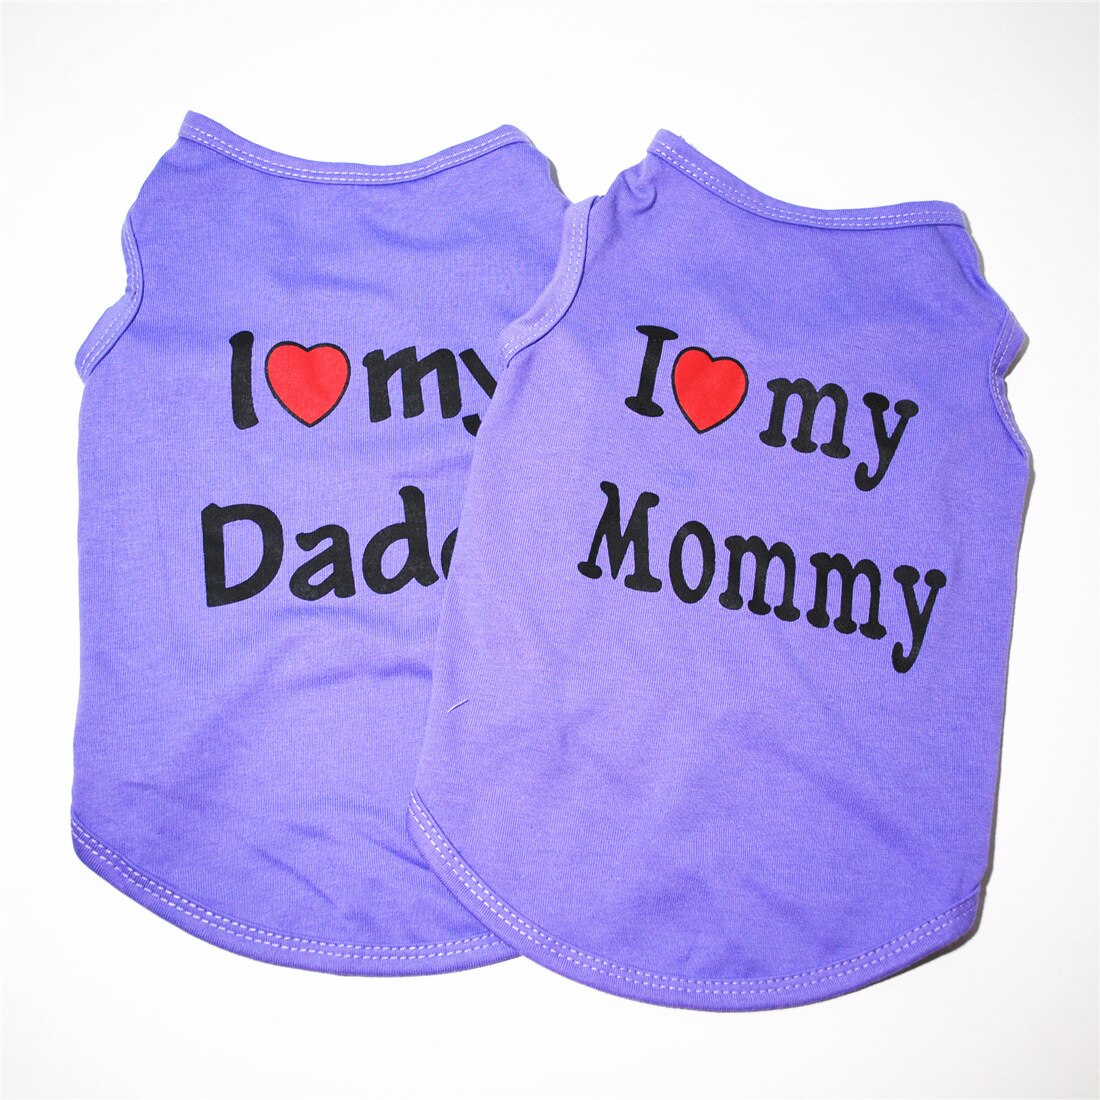 I Love my Mommy + I Love my Daddy,  pet T-Shirt.